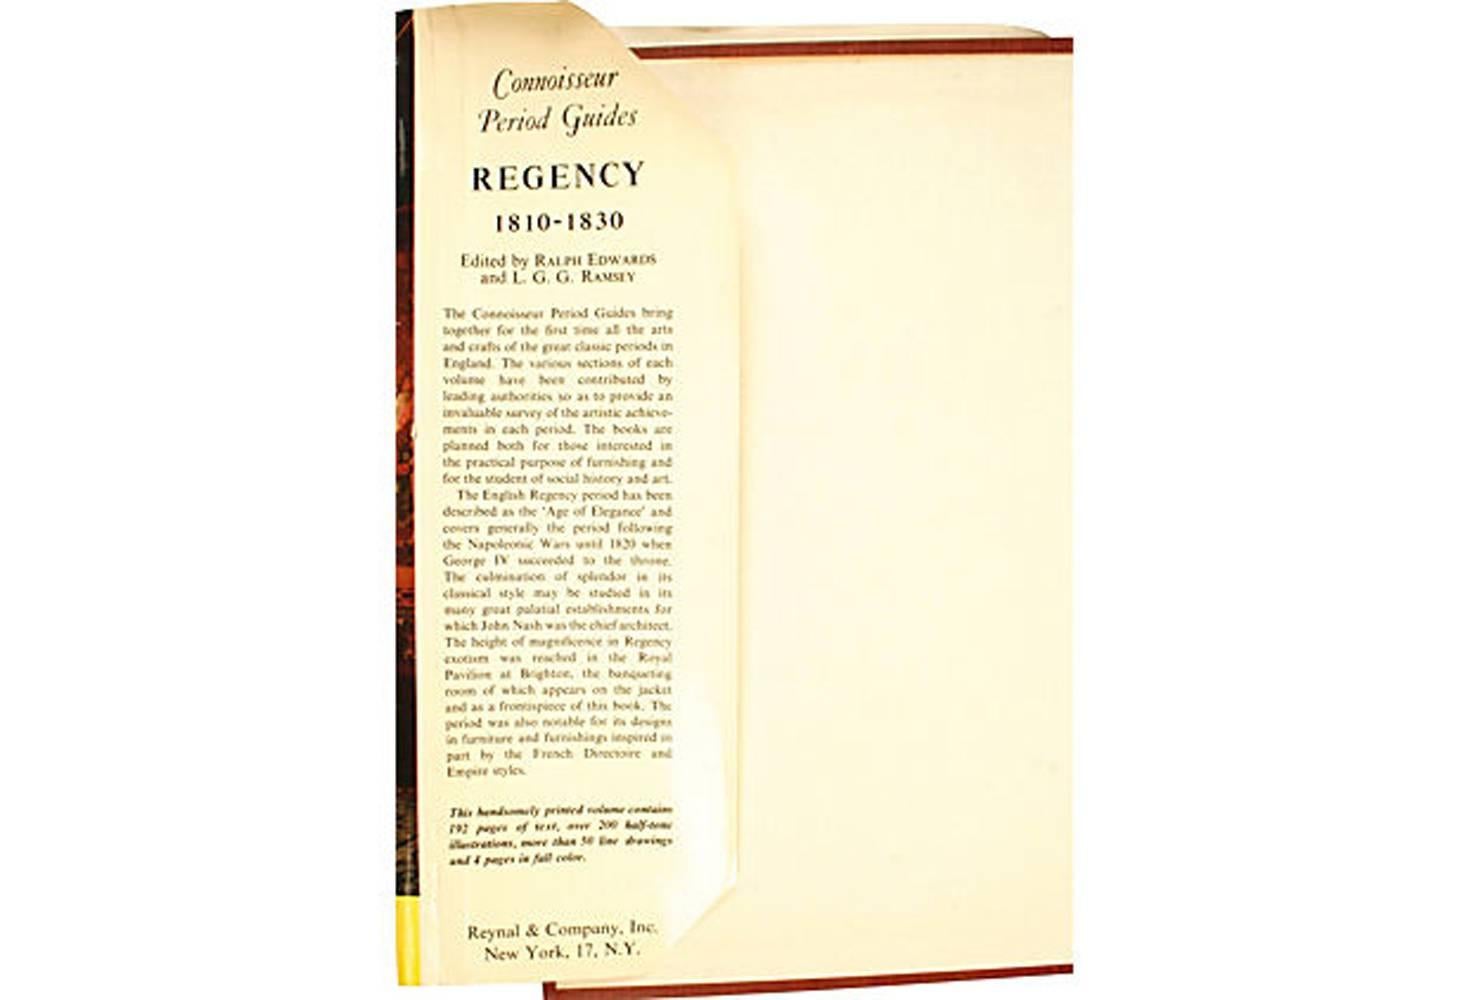 The Regency Period: 1810-1830 [Connoisseur Guides] edited by Ralph Edwards and L.G.G. Ramsay. NY: Reynal & Co., 1958. First edition hardcover with dust jacket. 180 pp. The Connoisseur, period guides to the houses, decoration, furnishing, and